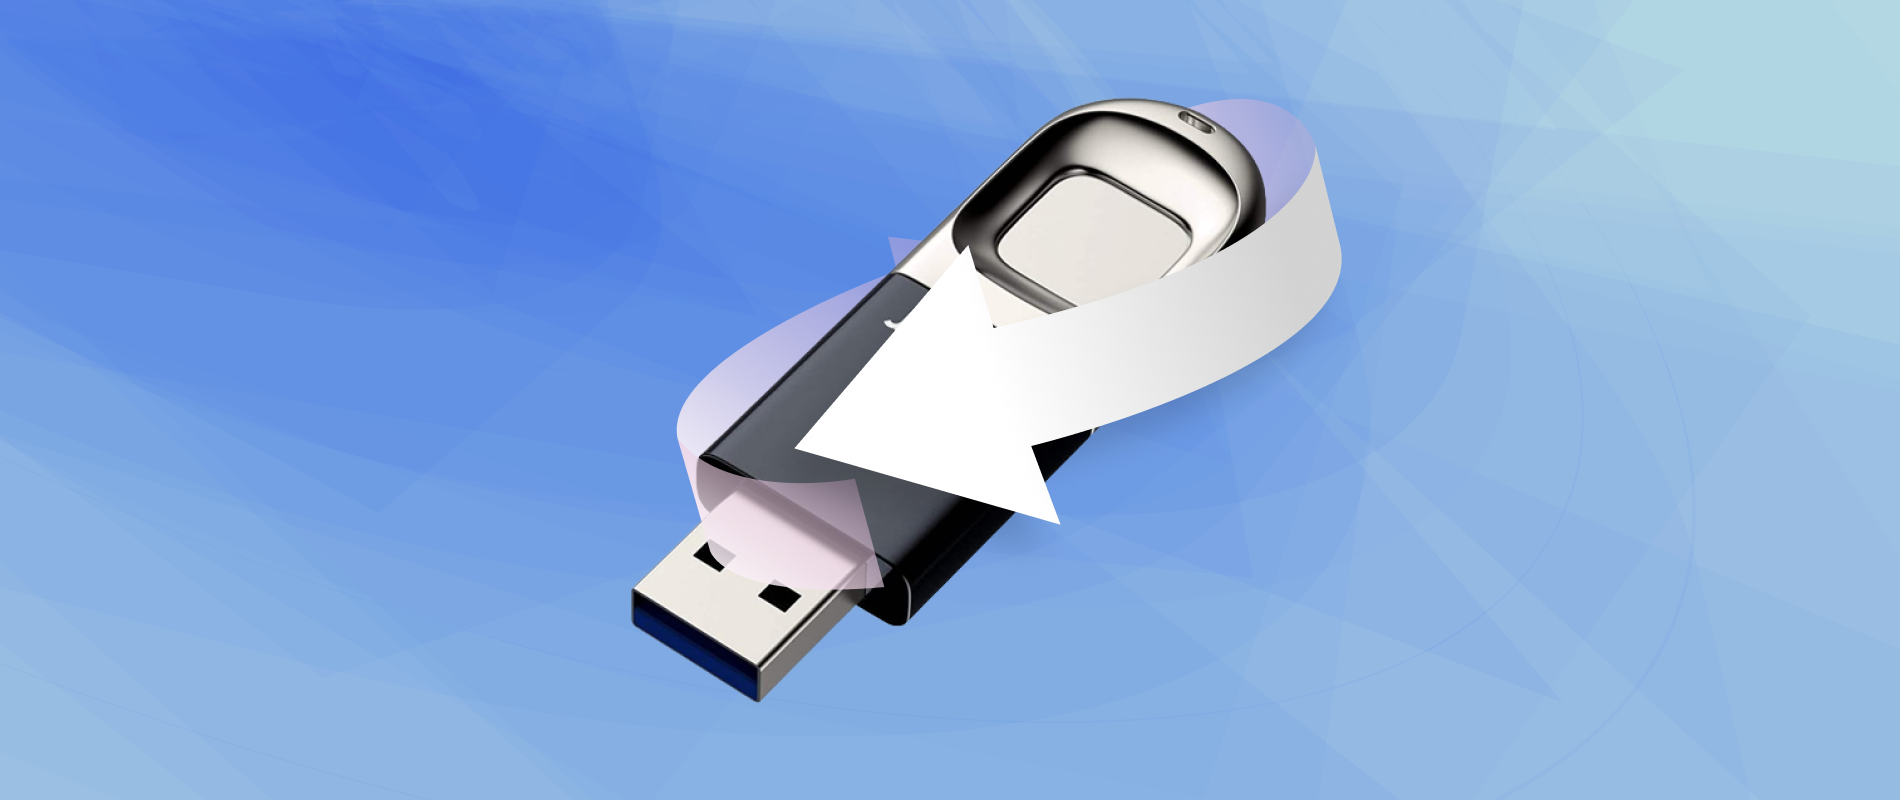 How to Recover Deleted Files From USB Flash Drive